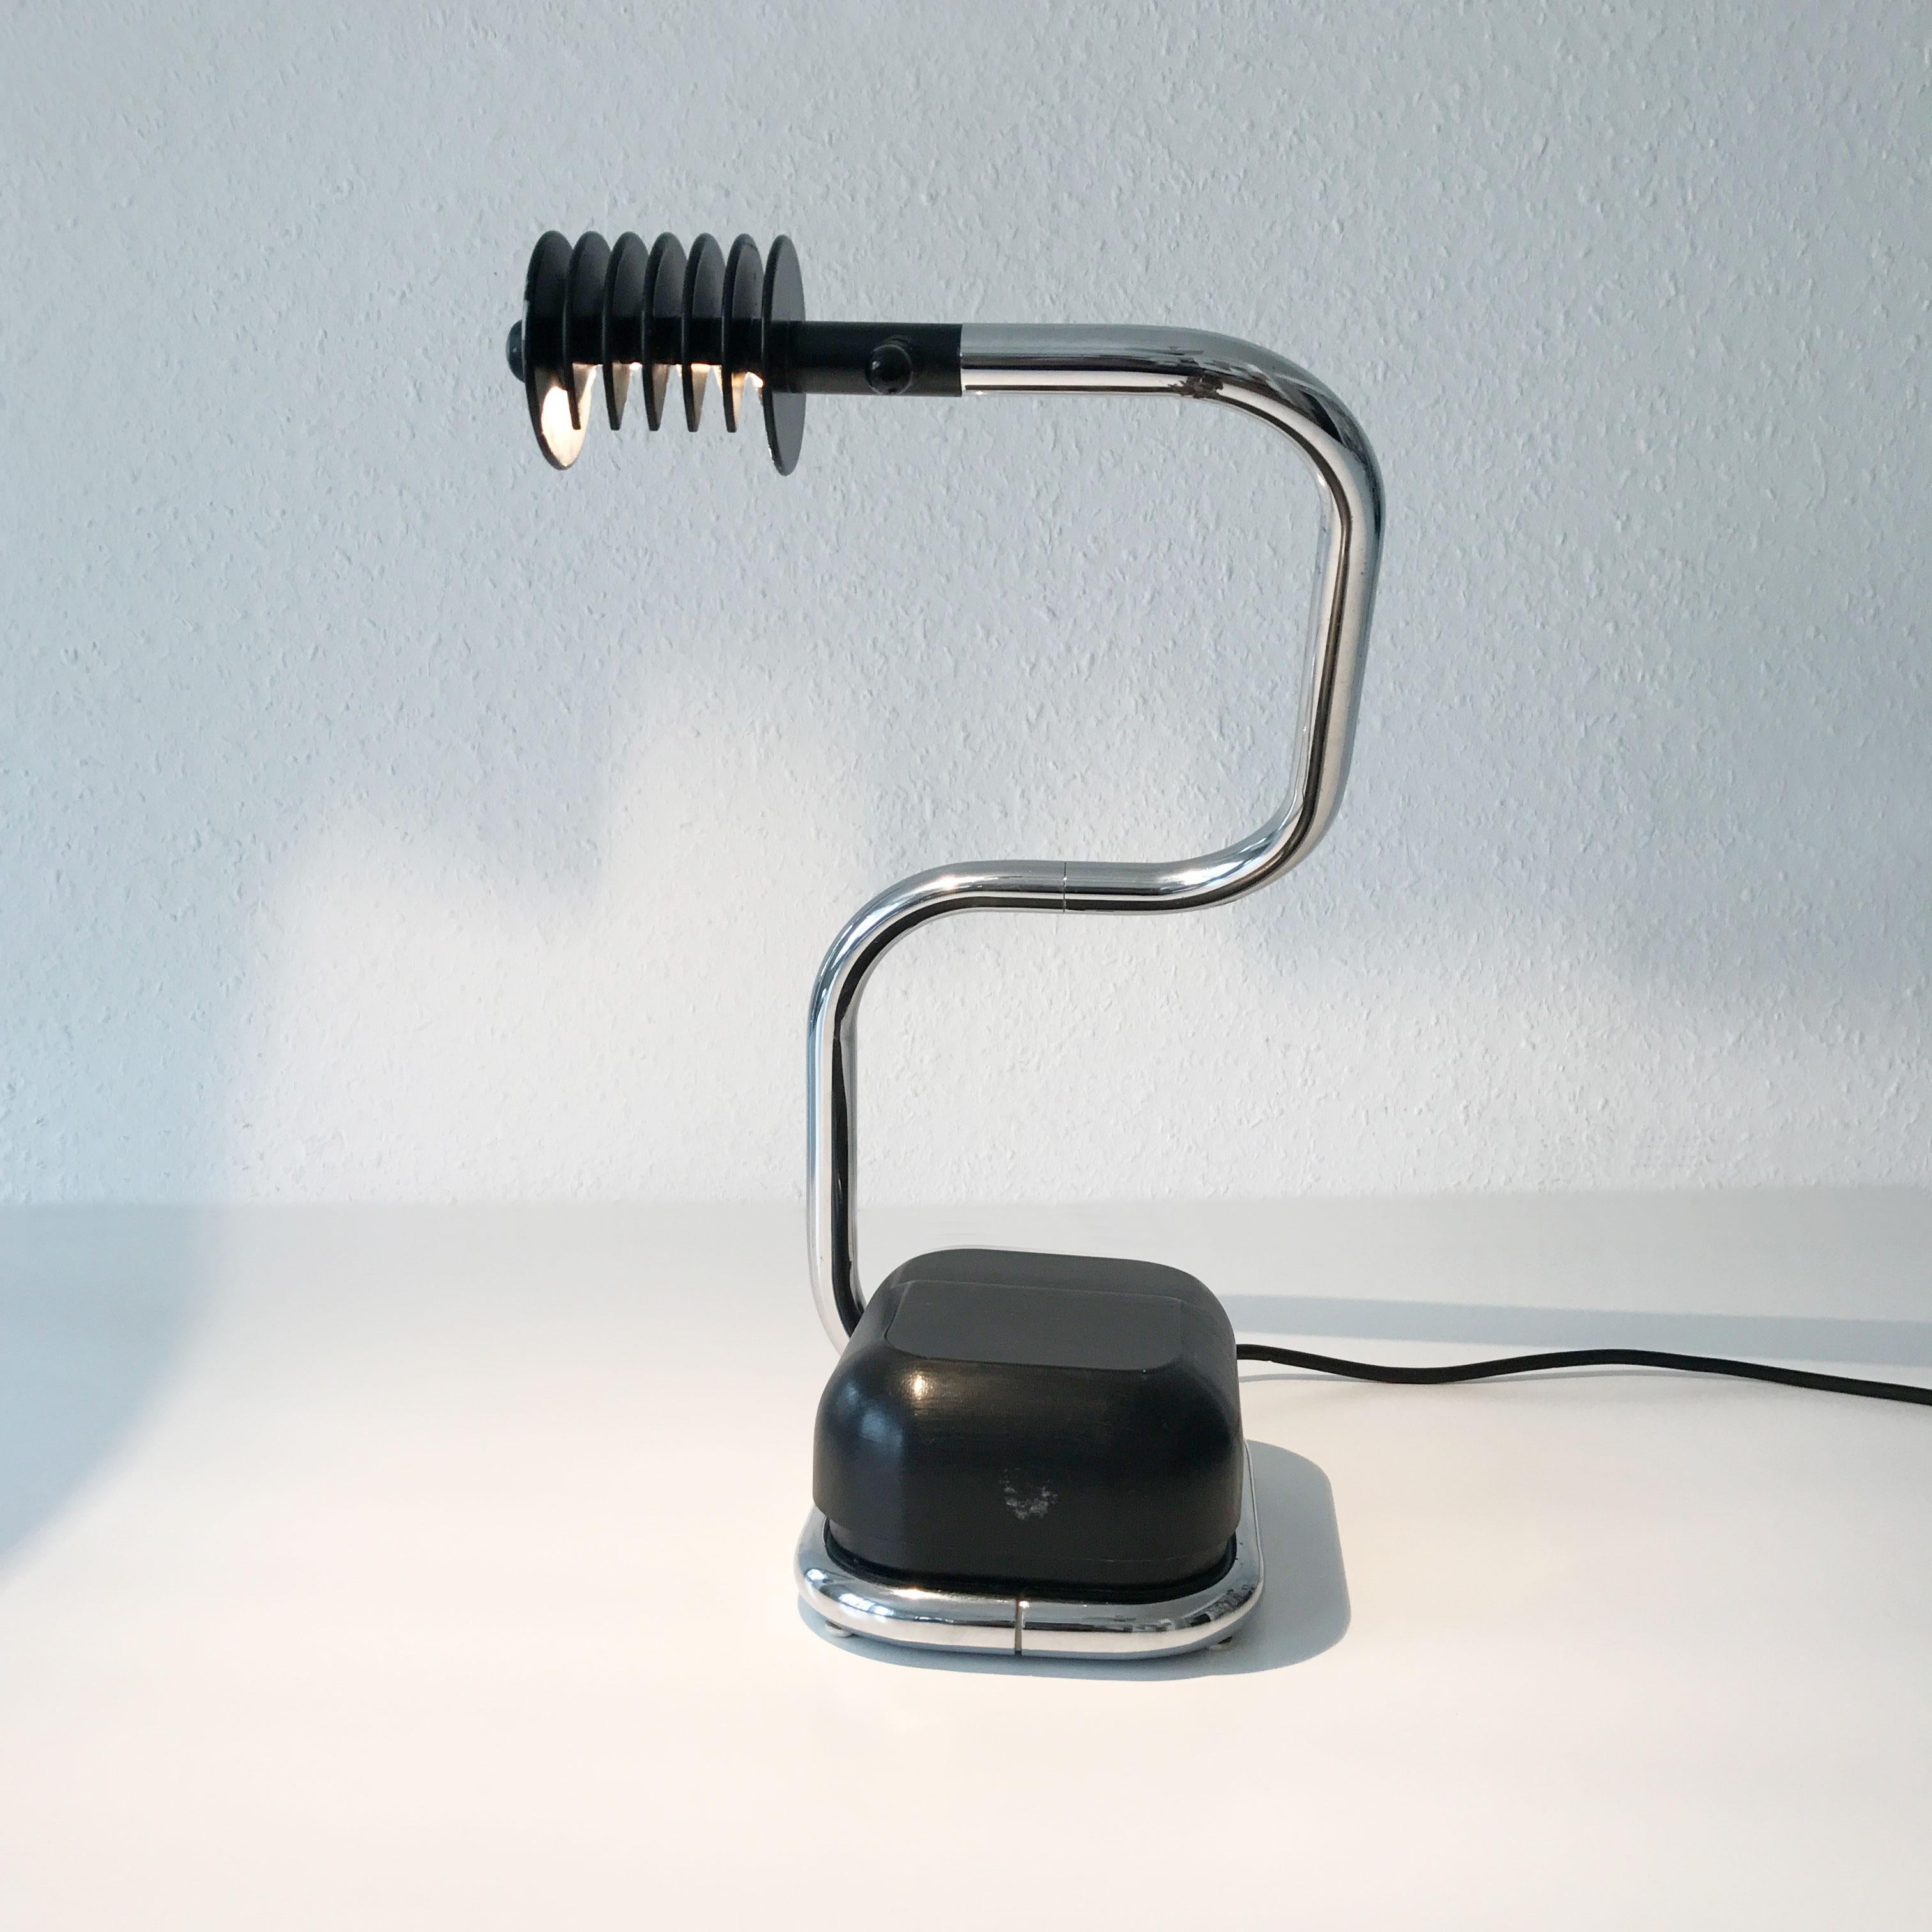 Extremely rare Mid-Century Modern Lucciola table lamp. Designed by Fabio Lenci, 1971 and manufactured by Harvey Guzzini, in Italy, 1970s.

This elegant table lamp is executed in chrome-plated steel tube, black lacquered metal, black plastic. It is